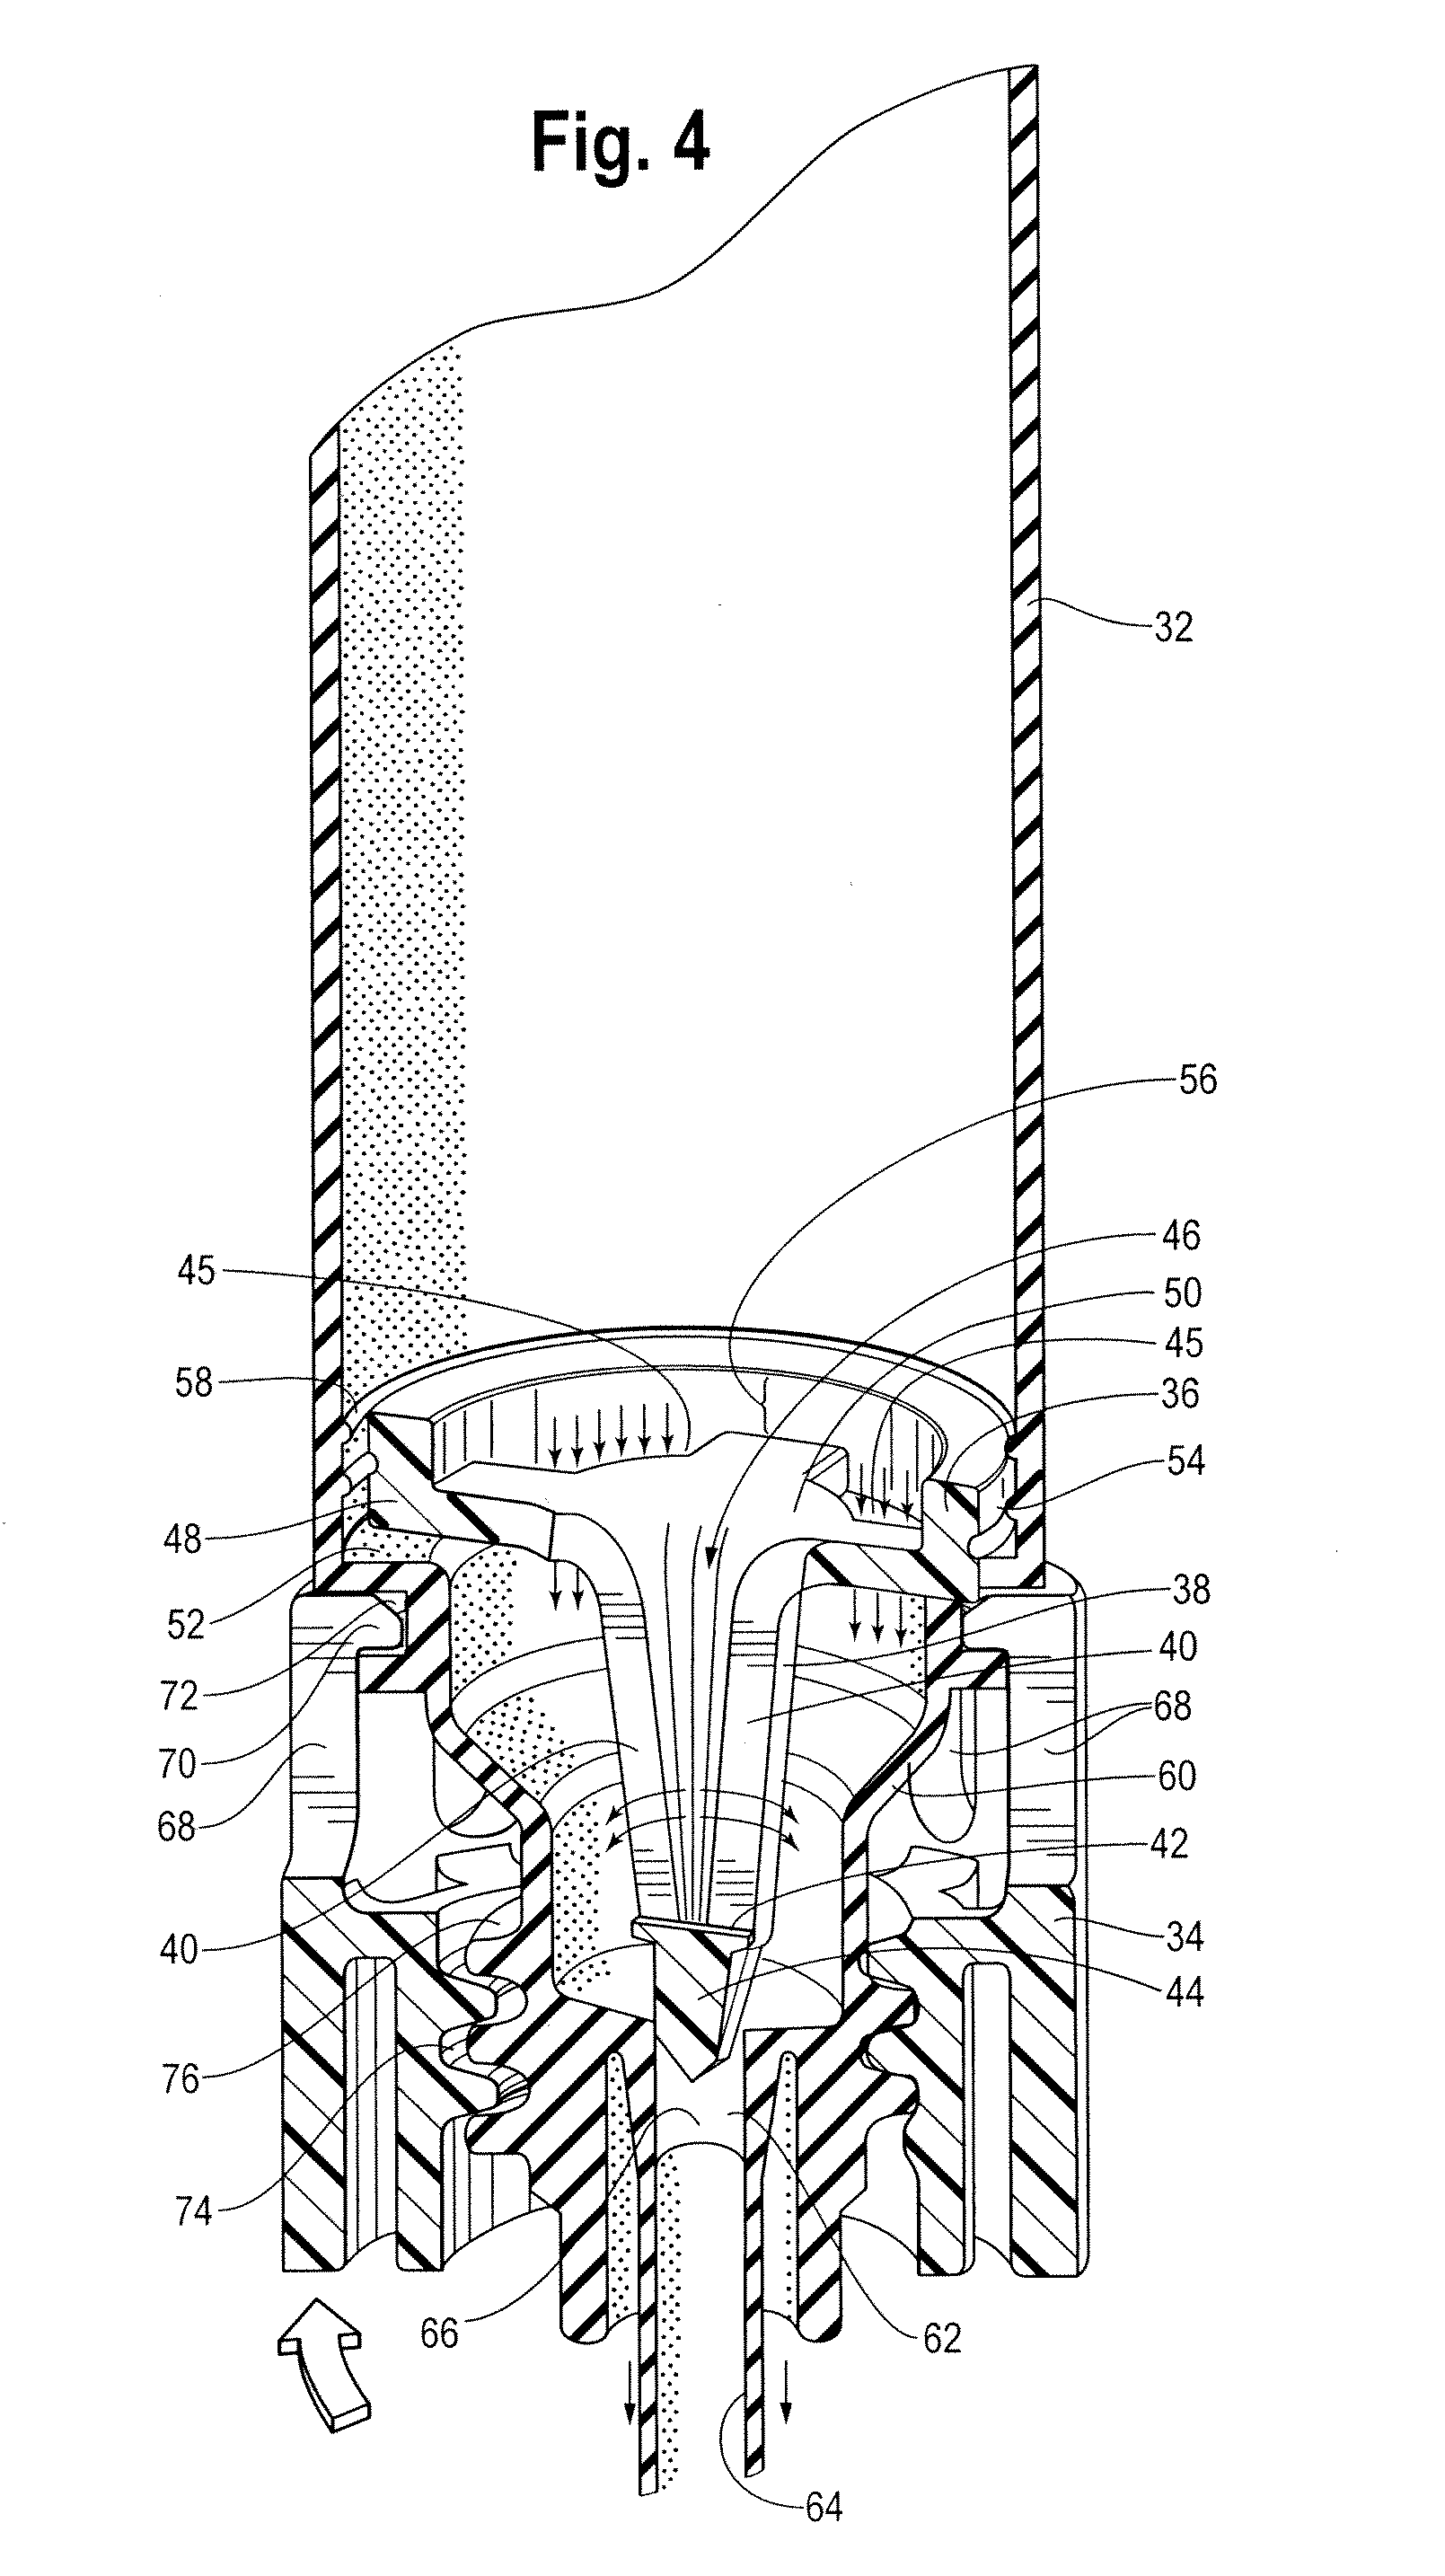 Drip chamber with flow control